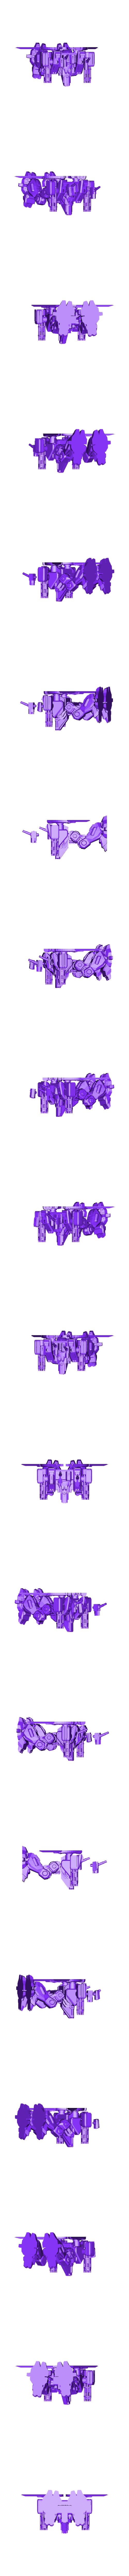 Death_from_Above_Example.stl Download free STL file Modular Mech Death from Above • 3D printer object, mrhers2